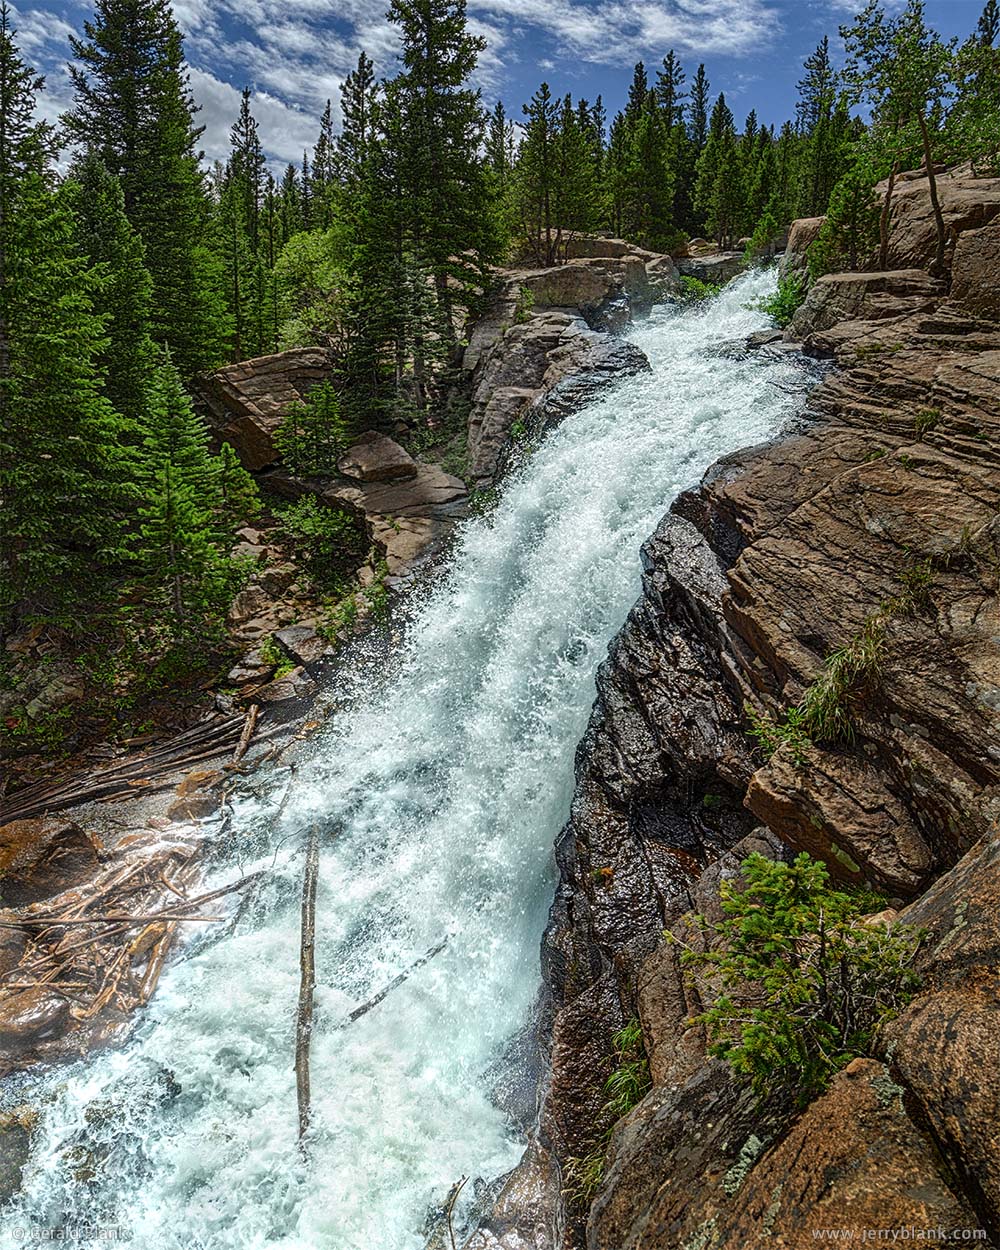 #22563 - Tons of clear mountain water per second flow down Alberta Falls, located in Glacier Gorge, Rocky Mountain National Park, Colorado - photo by Jerry Blank